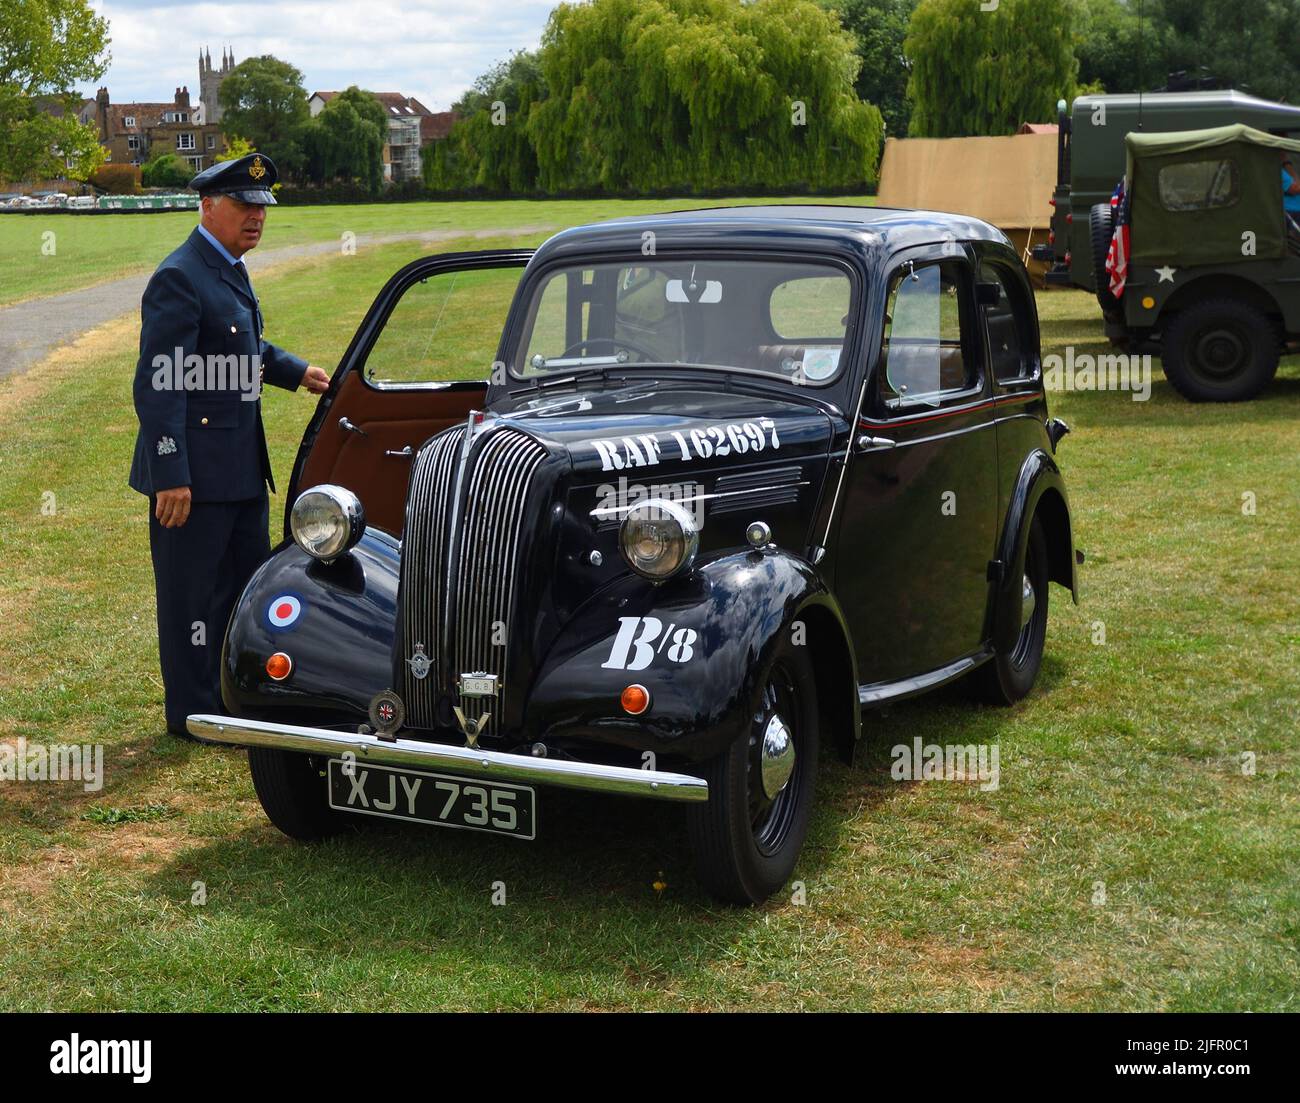 Vintage 1939 Standard Flying 8 with RAF markings and man in RAF officers uniform. Stock Photo